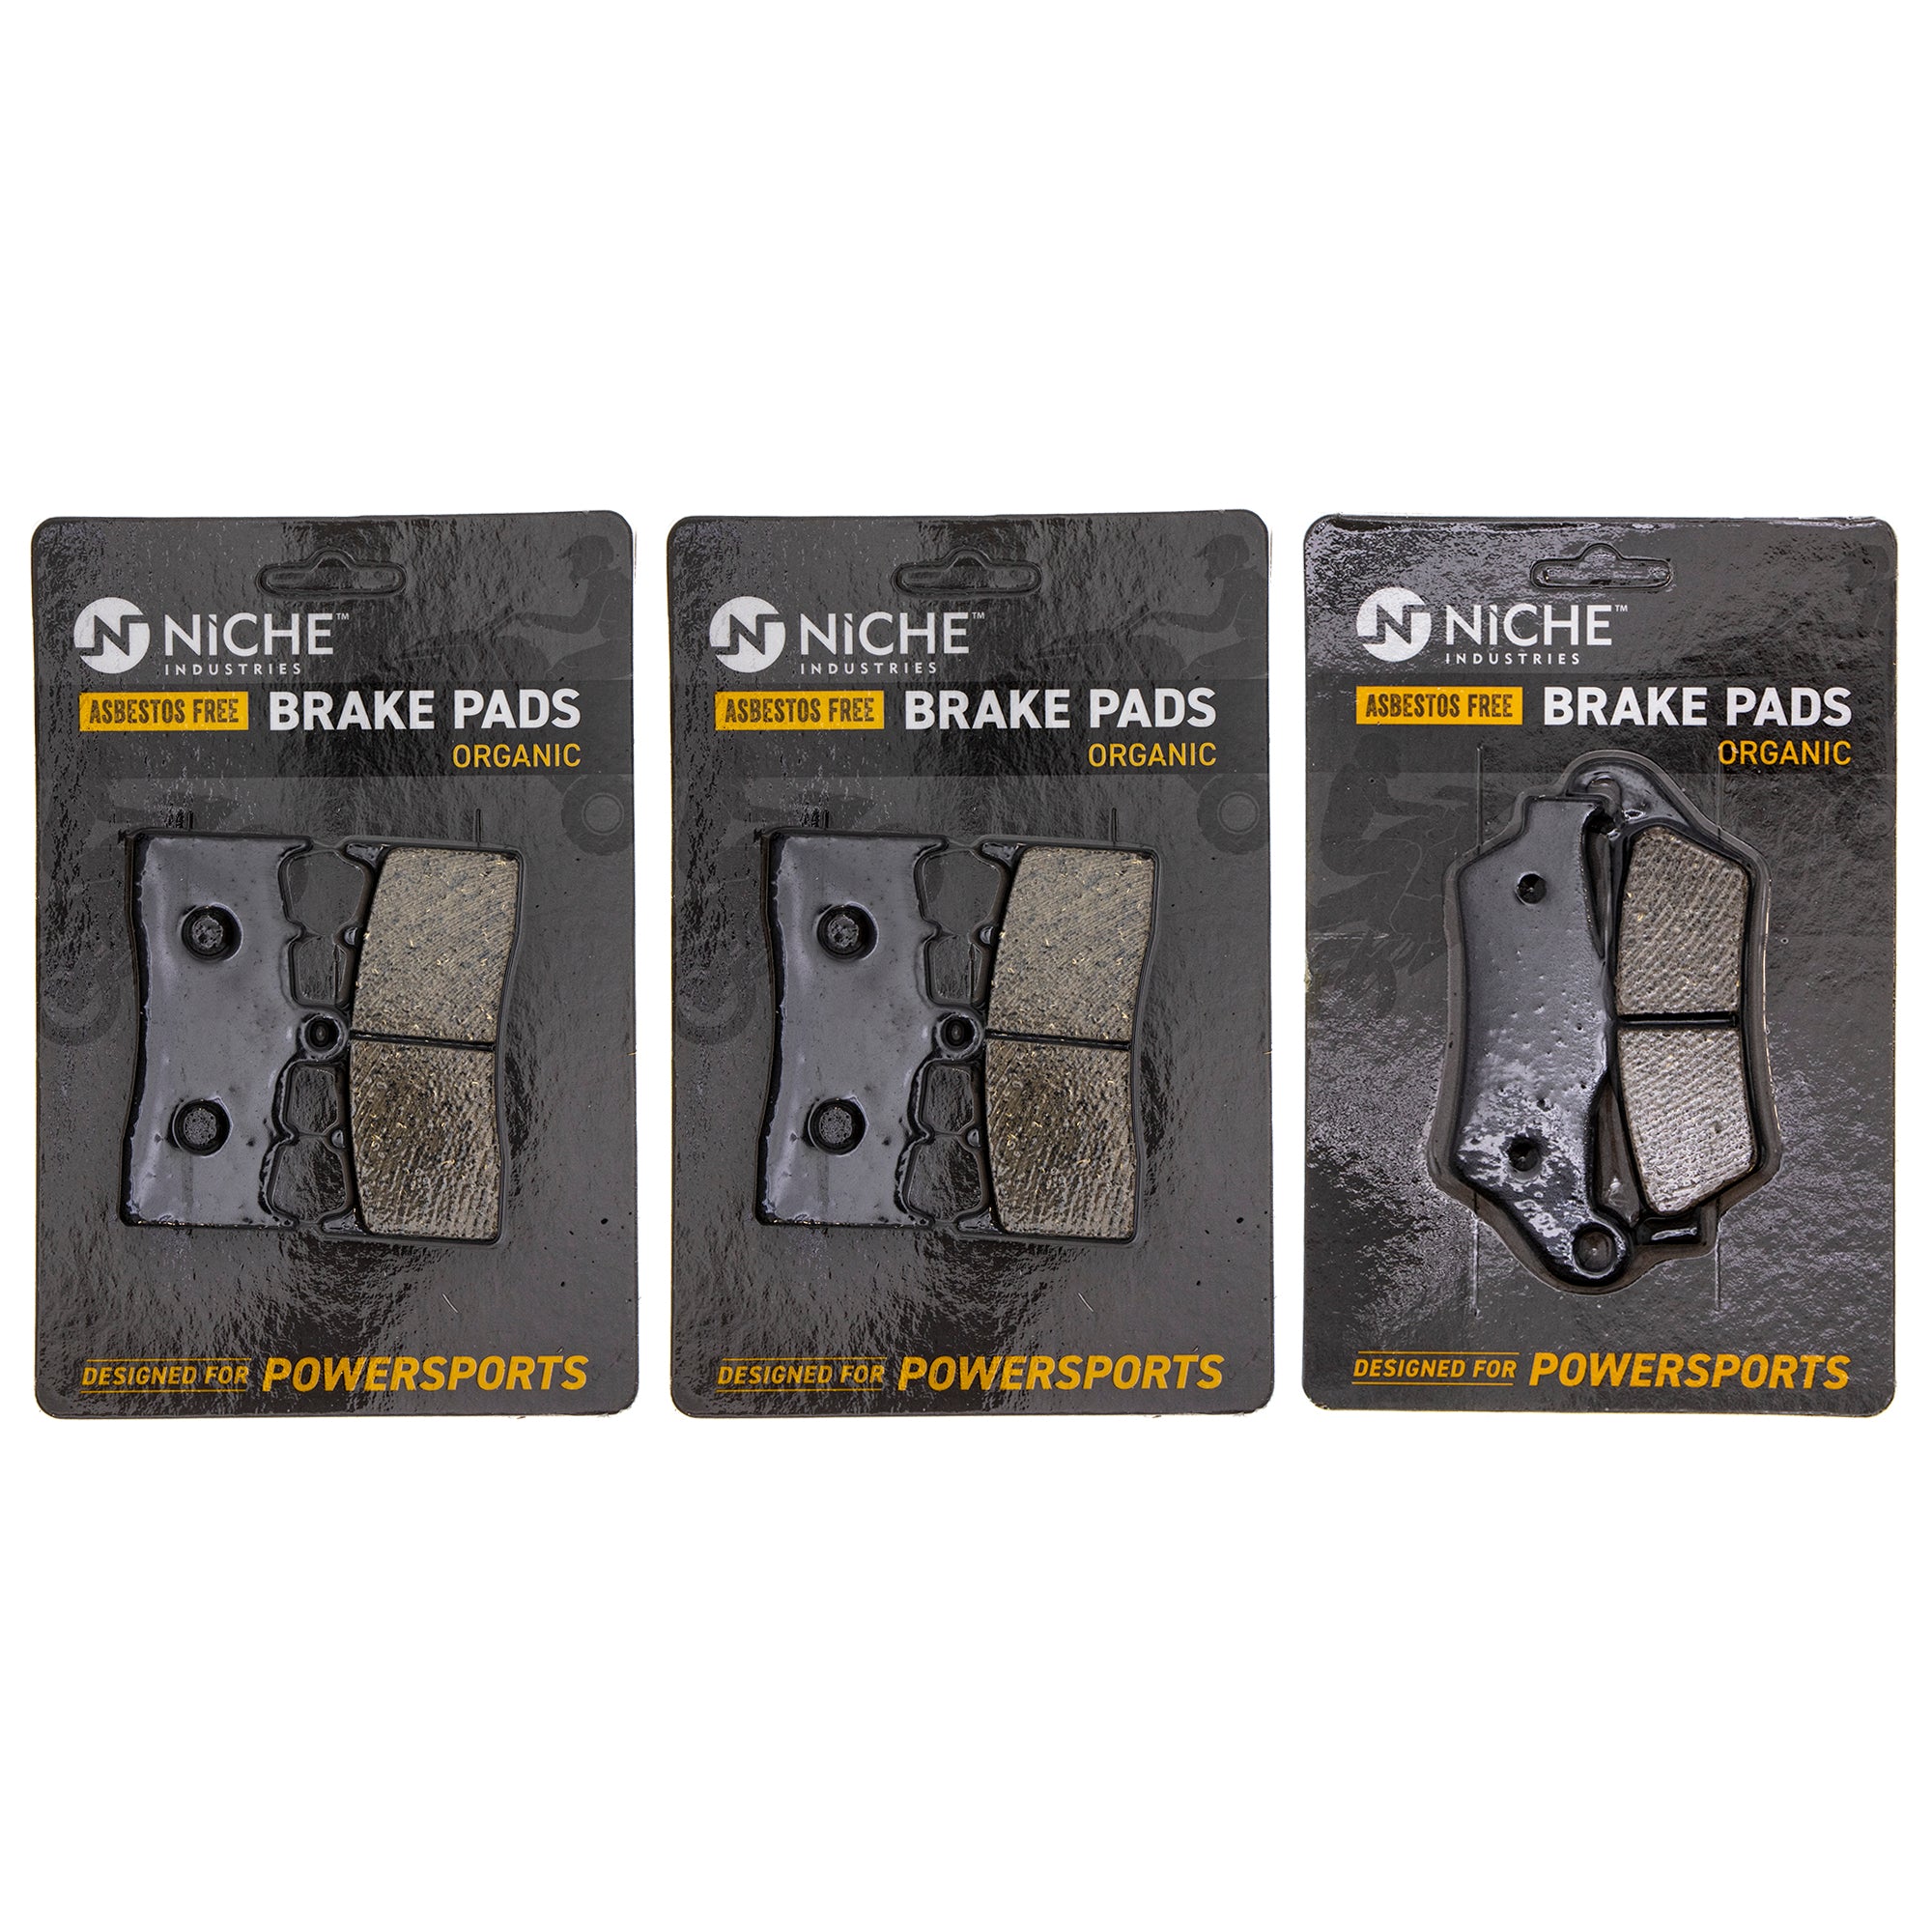 Brake Pad Kit Front/Rear for zOTHER BMW R1200R R1200C R1150RS R1150R 34212335465 NICHE MK1002717